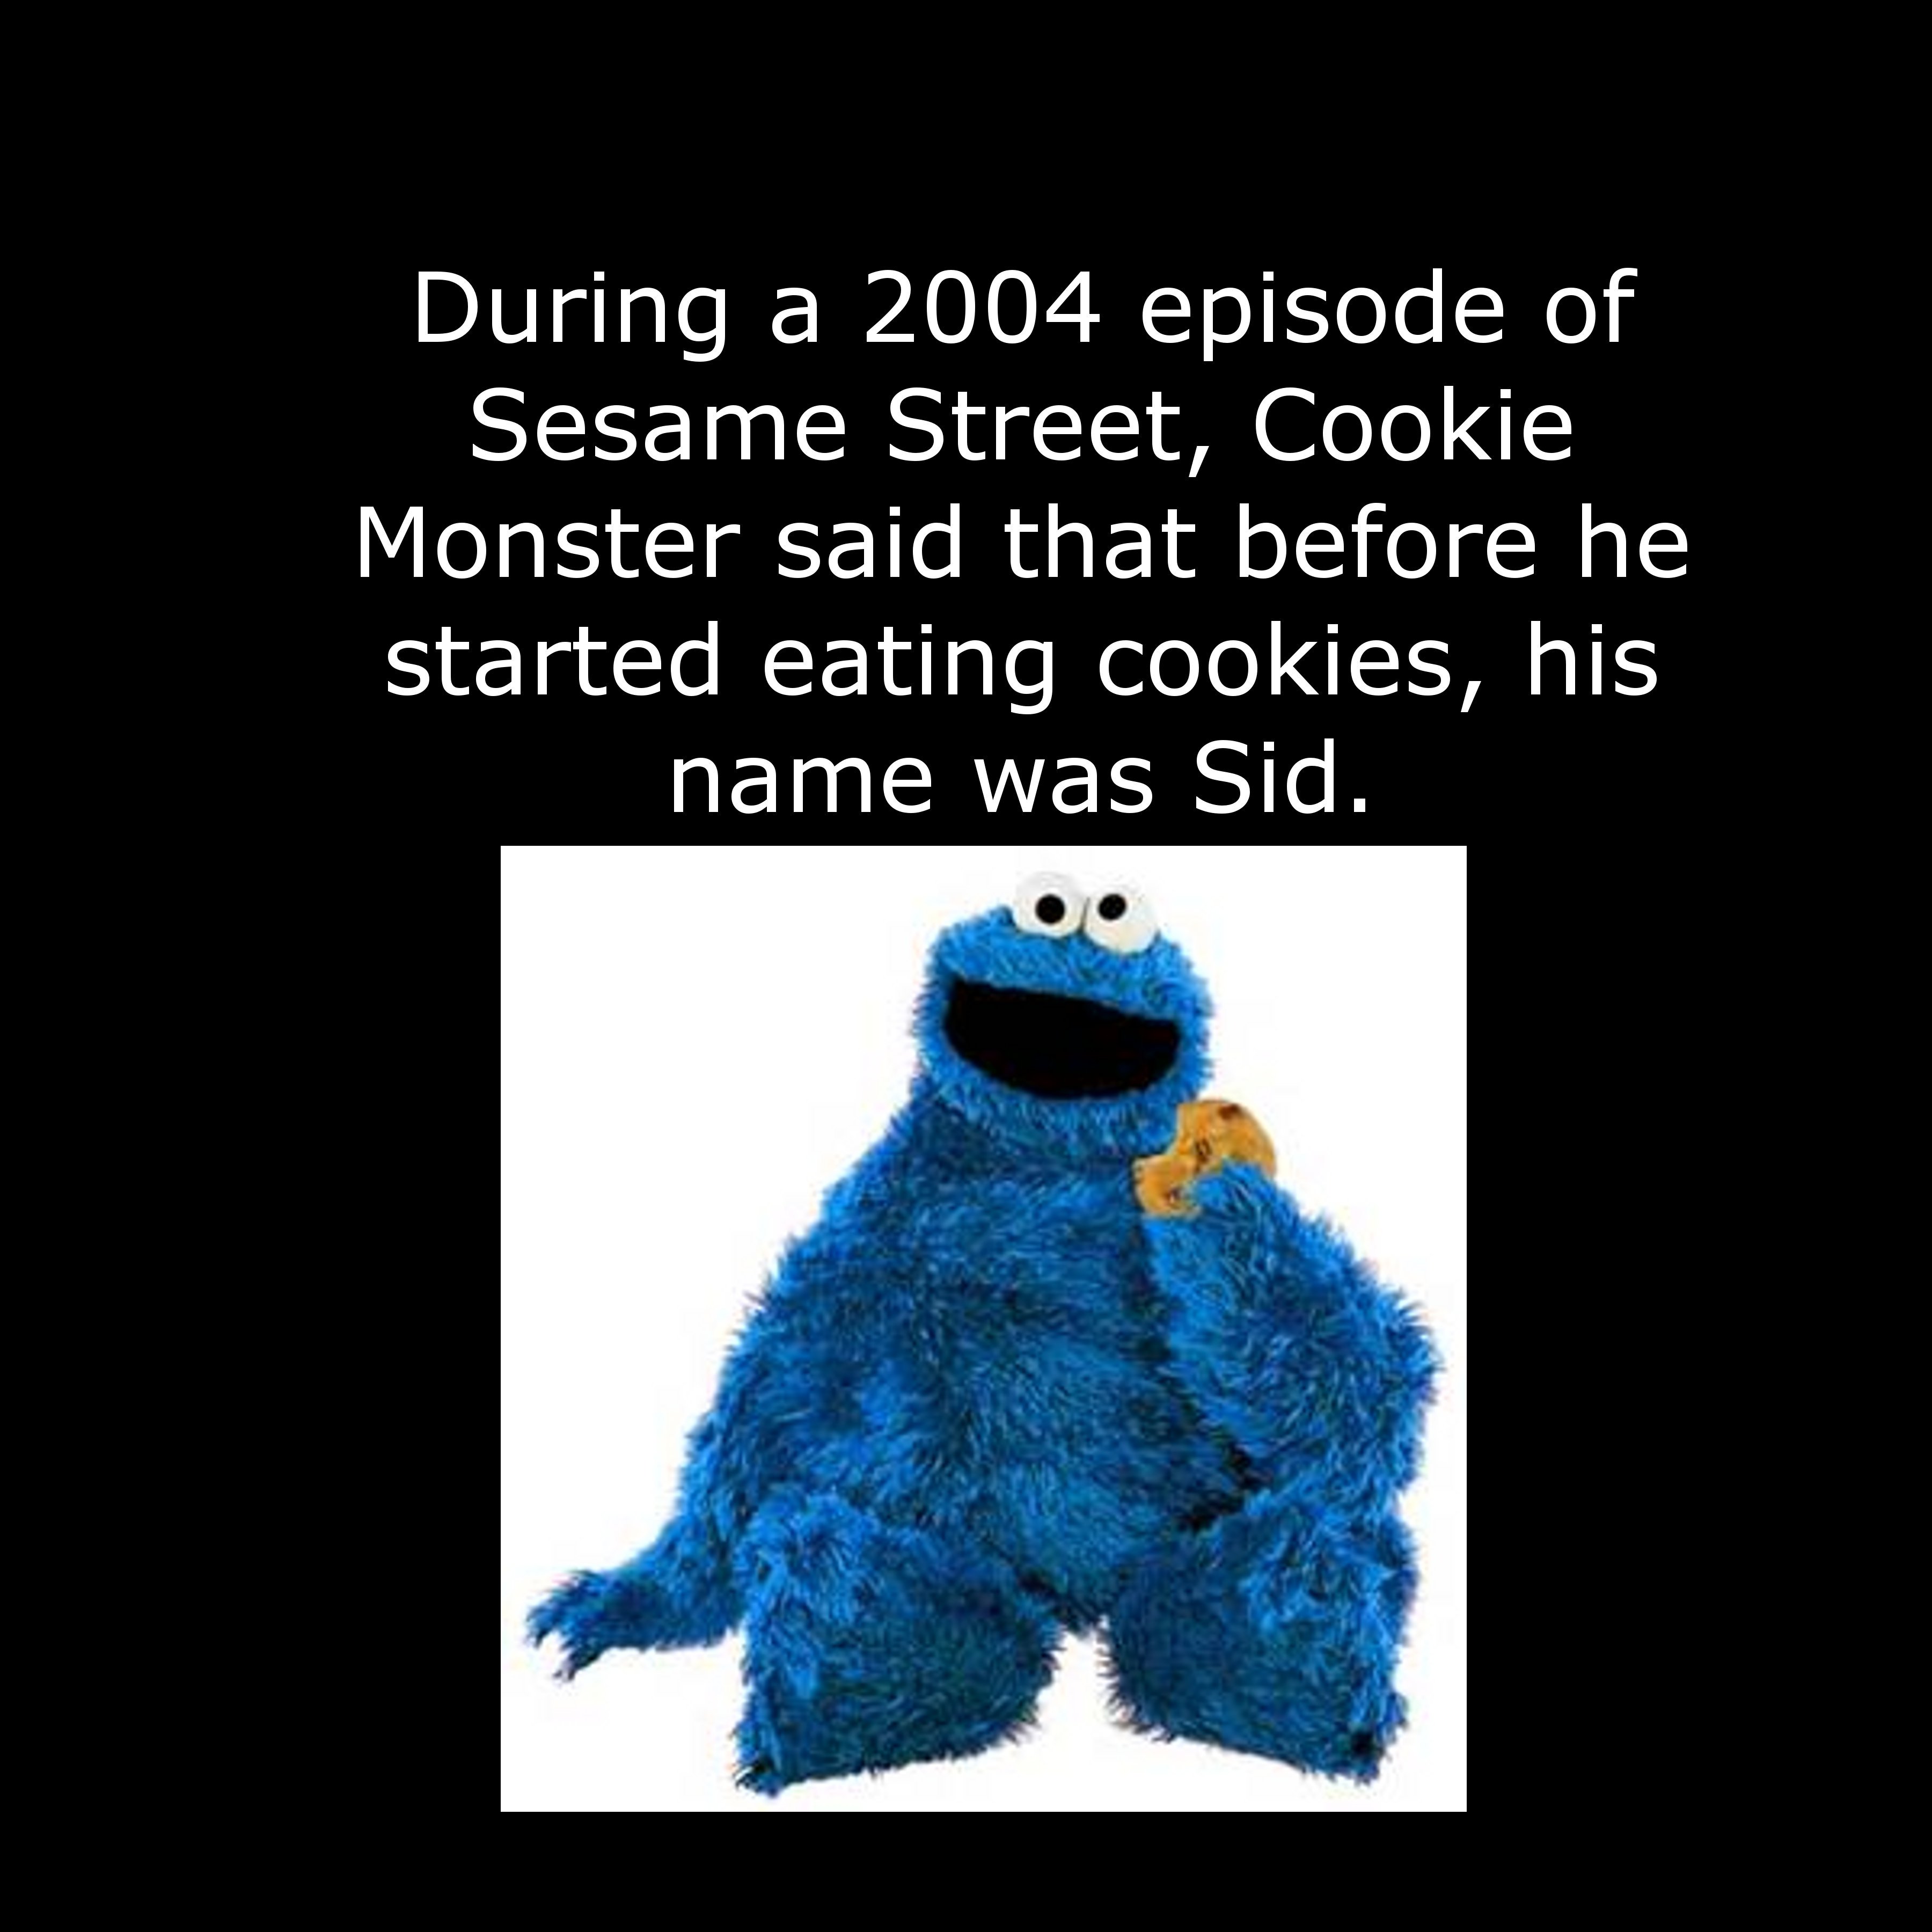 photo caption - During a 2004 episode of Sesame Street, Cookie Monster said that before he started eating cookies, his name was Sid.